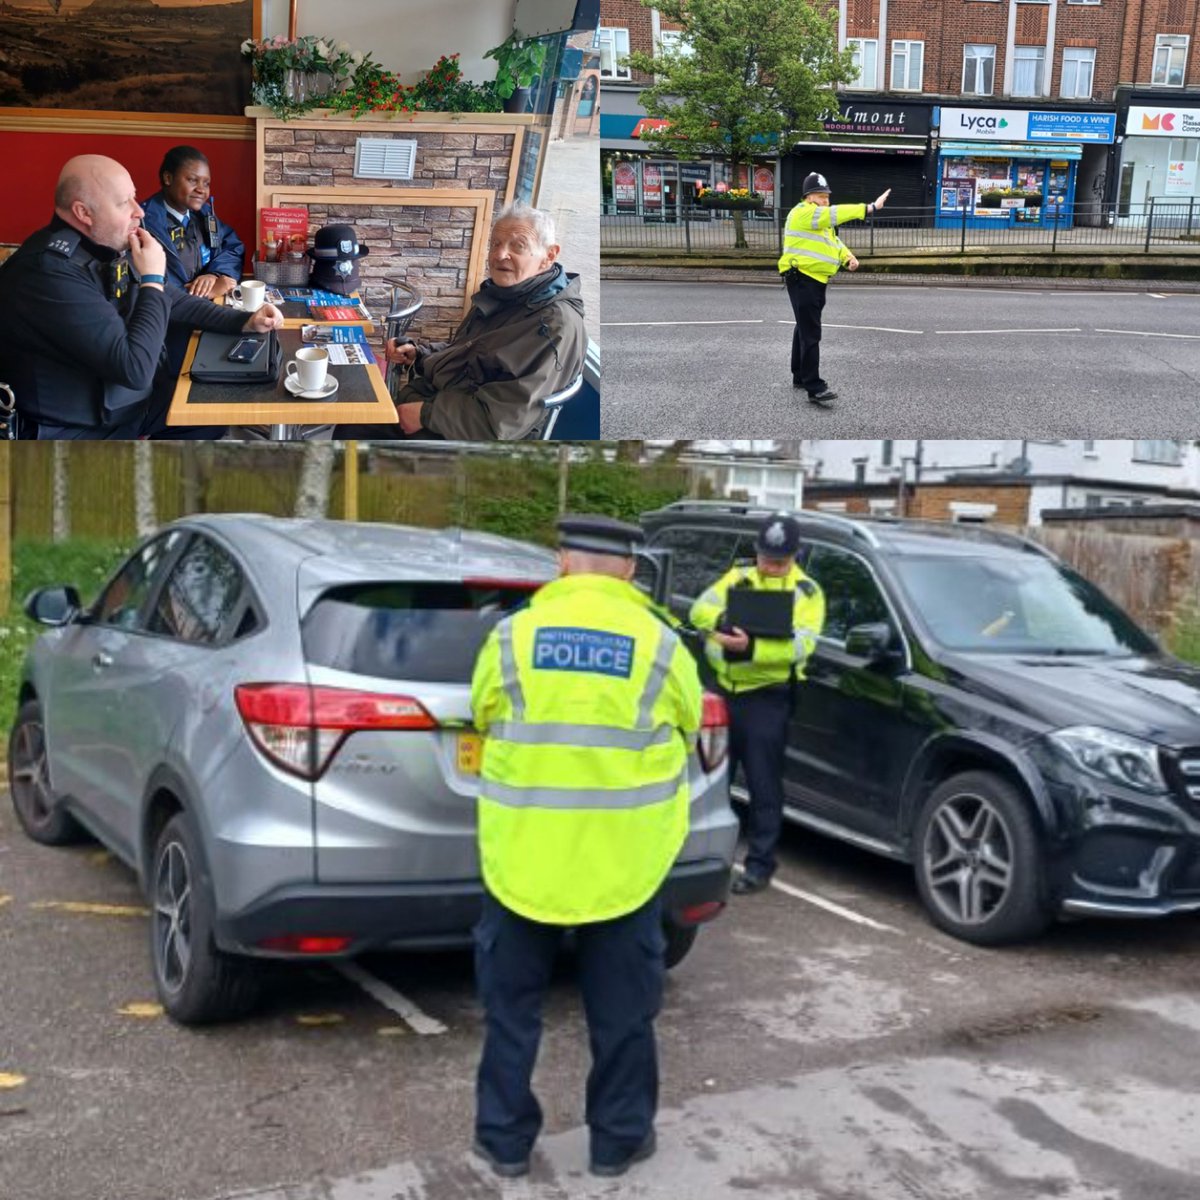 #OpCubo Your local ward officers conducted a joint traffic Op this morning with @MPSCanons & @MPSStanmorePark targeting vehicles for traffic offences NO fines issued on this occasion! So far this week.. ✔️Cuppa with a Copper ✔️Hi-vis patrols ✔️ASB Hotspots checked #MyLocalMet